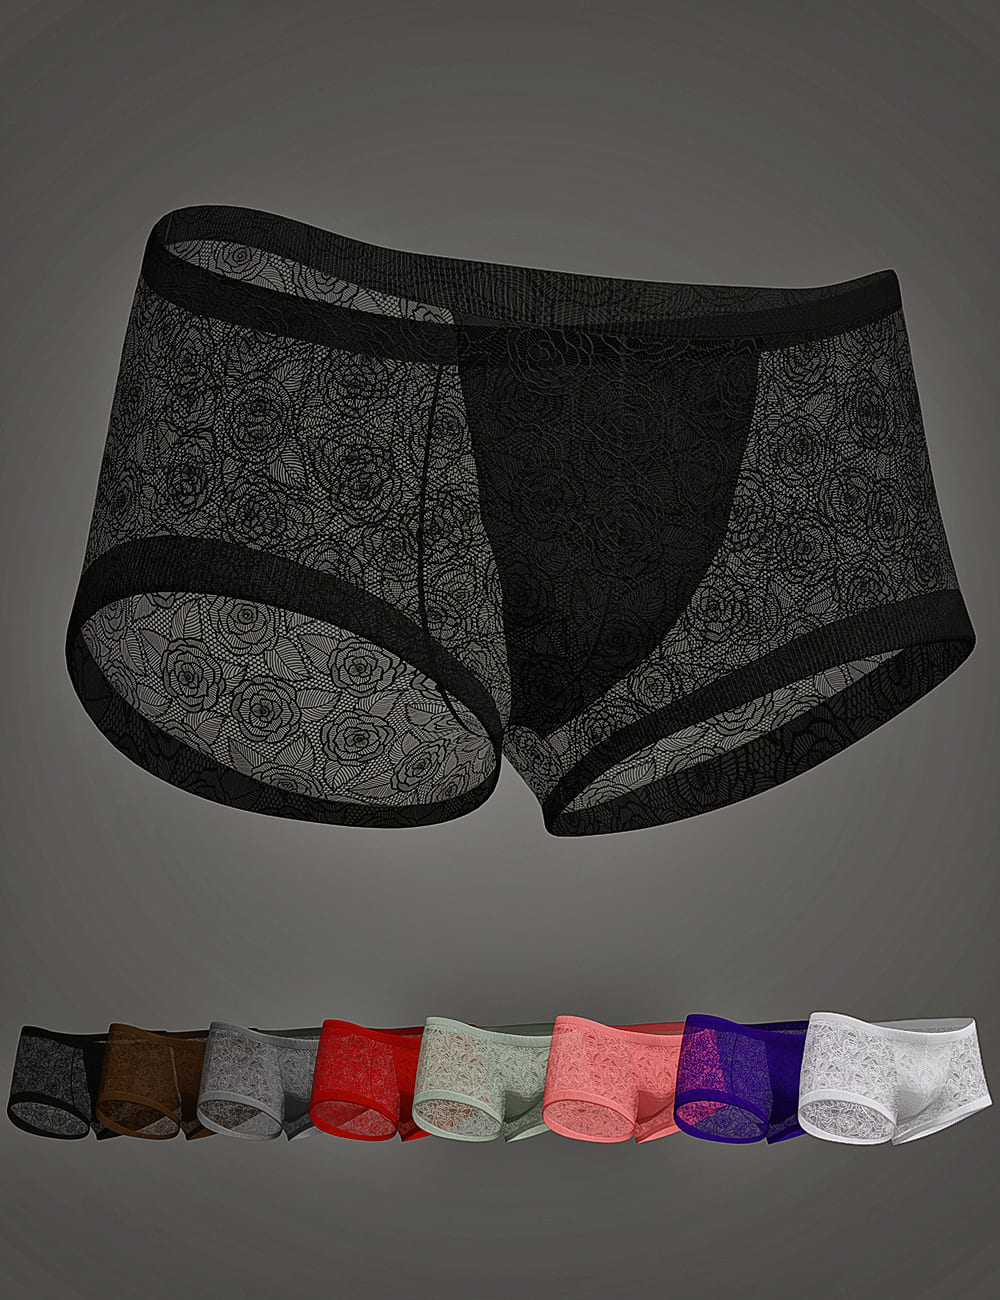 XF Bunny Lace Lingerie Briefs for Genesis 8 and 8.1 Males_DAZ3DDL